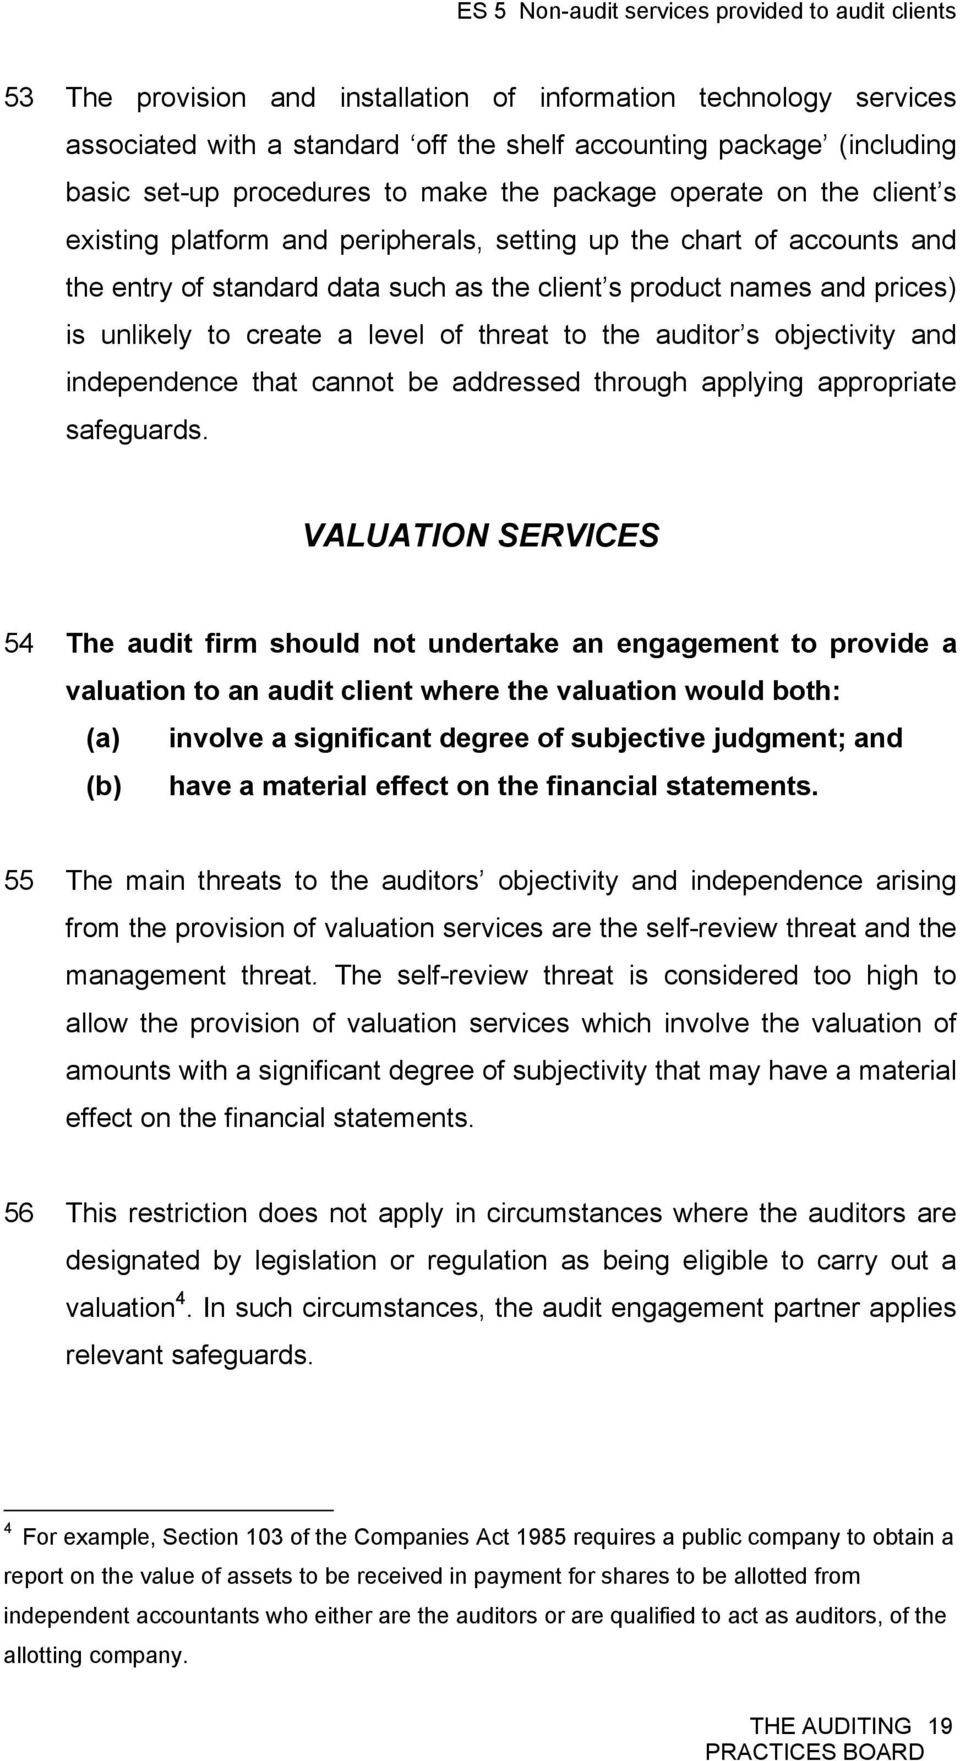 the auditor s objectivity and independence that cannot be addressed through applying appropriate safeguards.